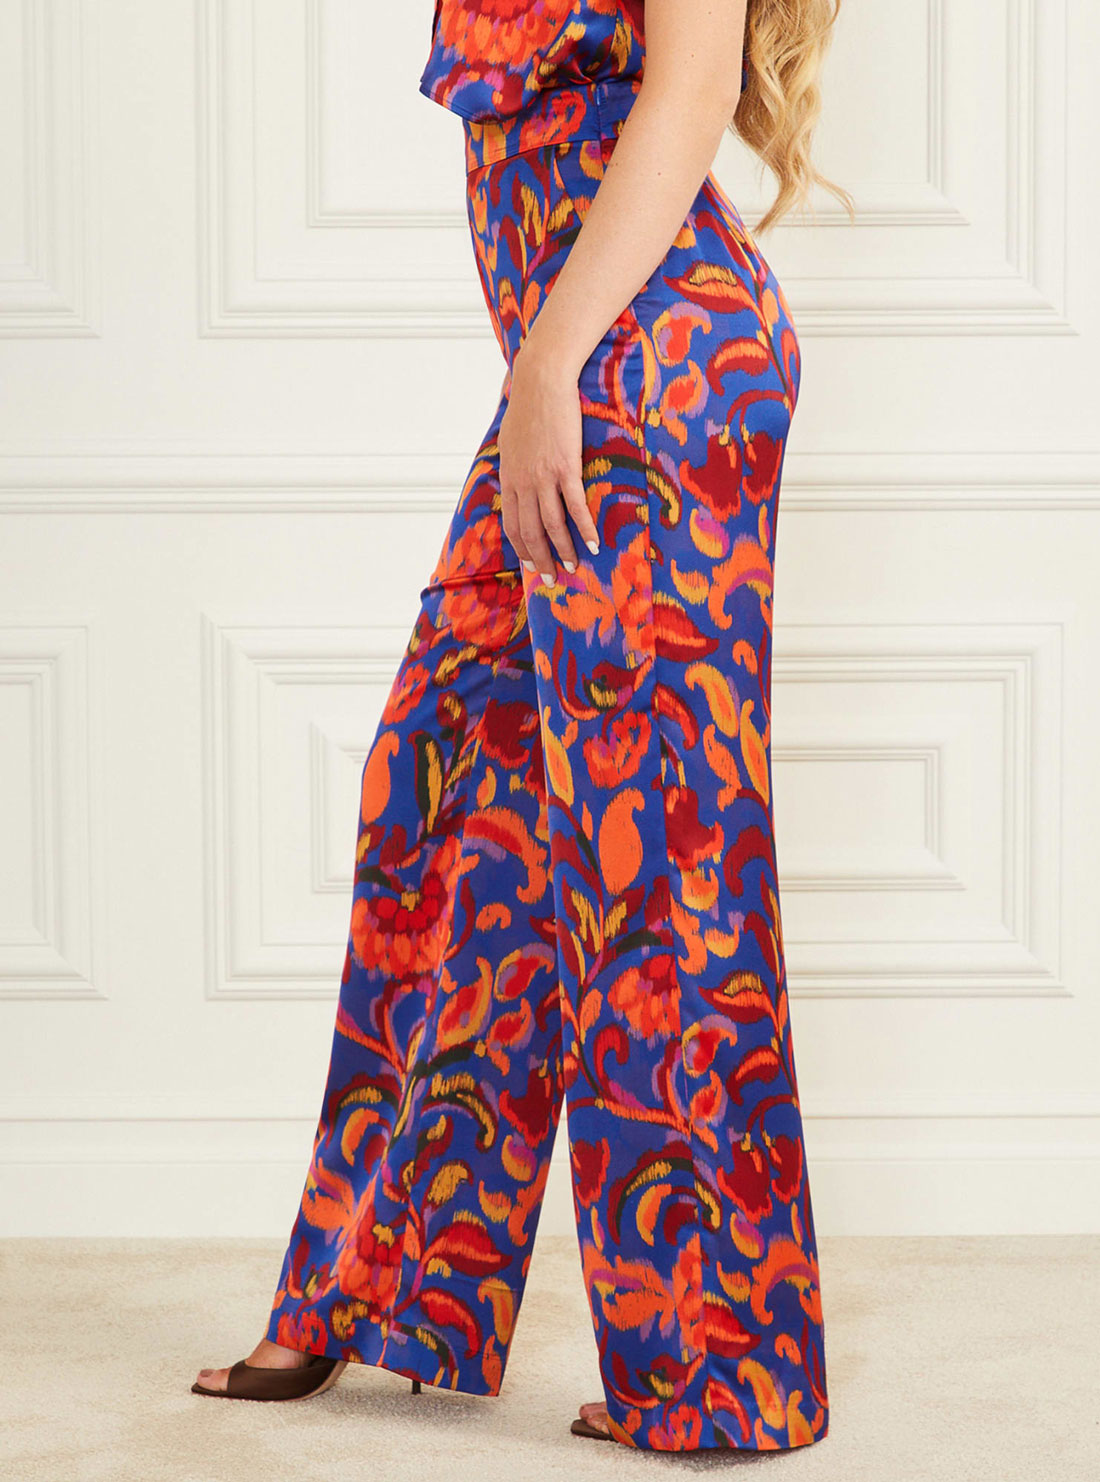 Marciano Betty Blue Printed Pants | GUESS Women's Apparel | side view